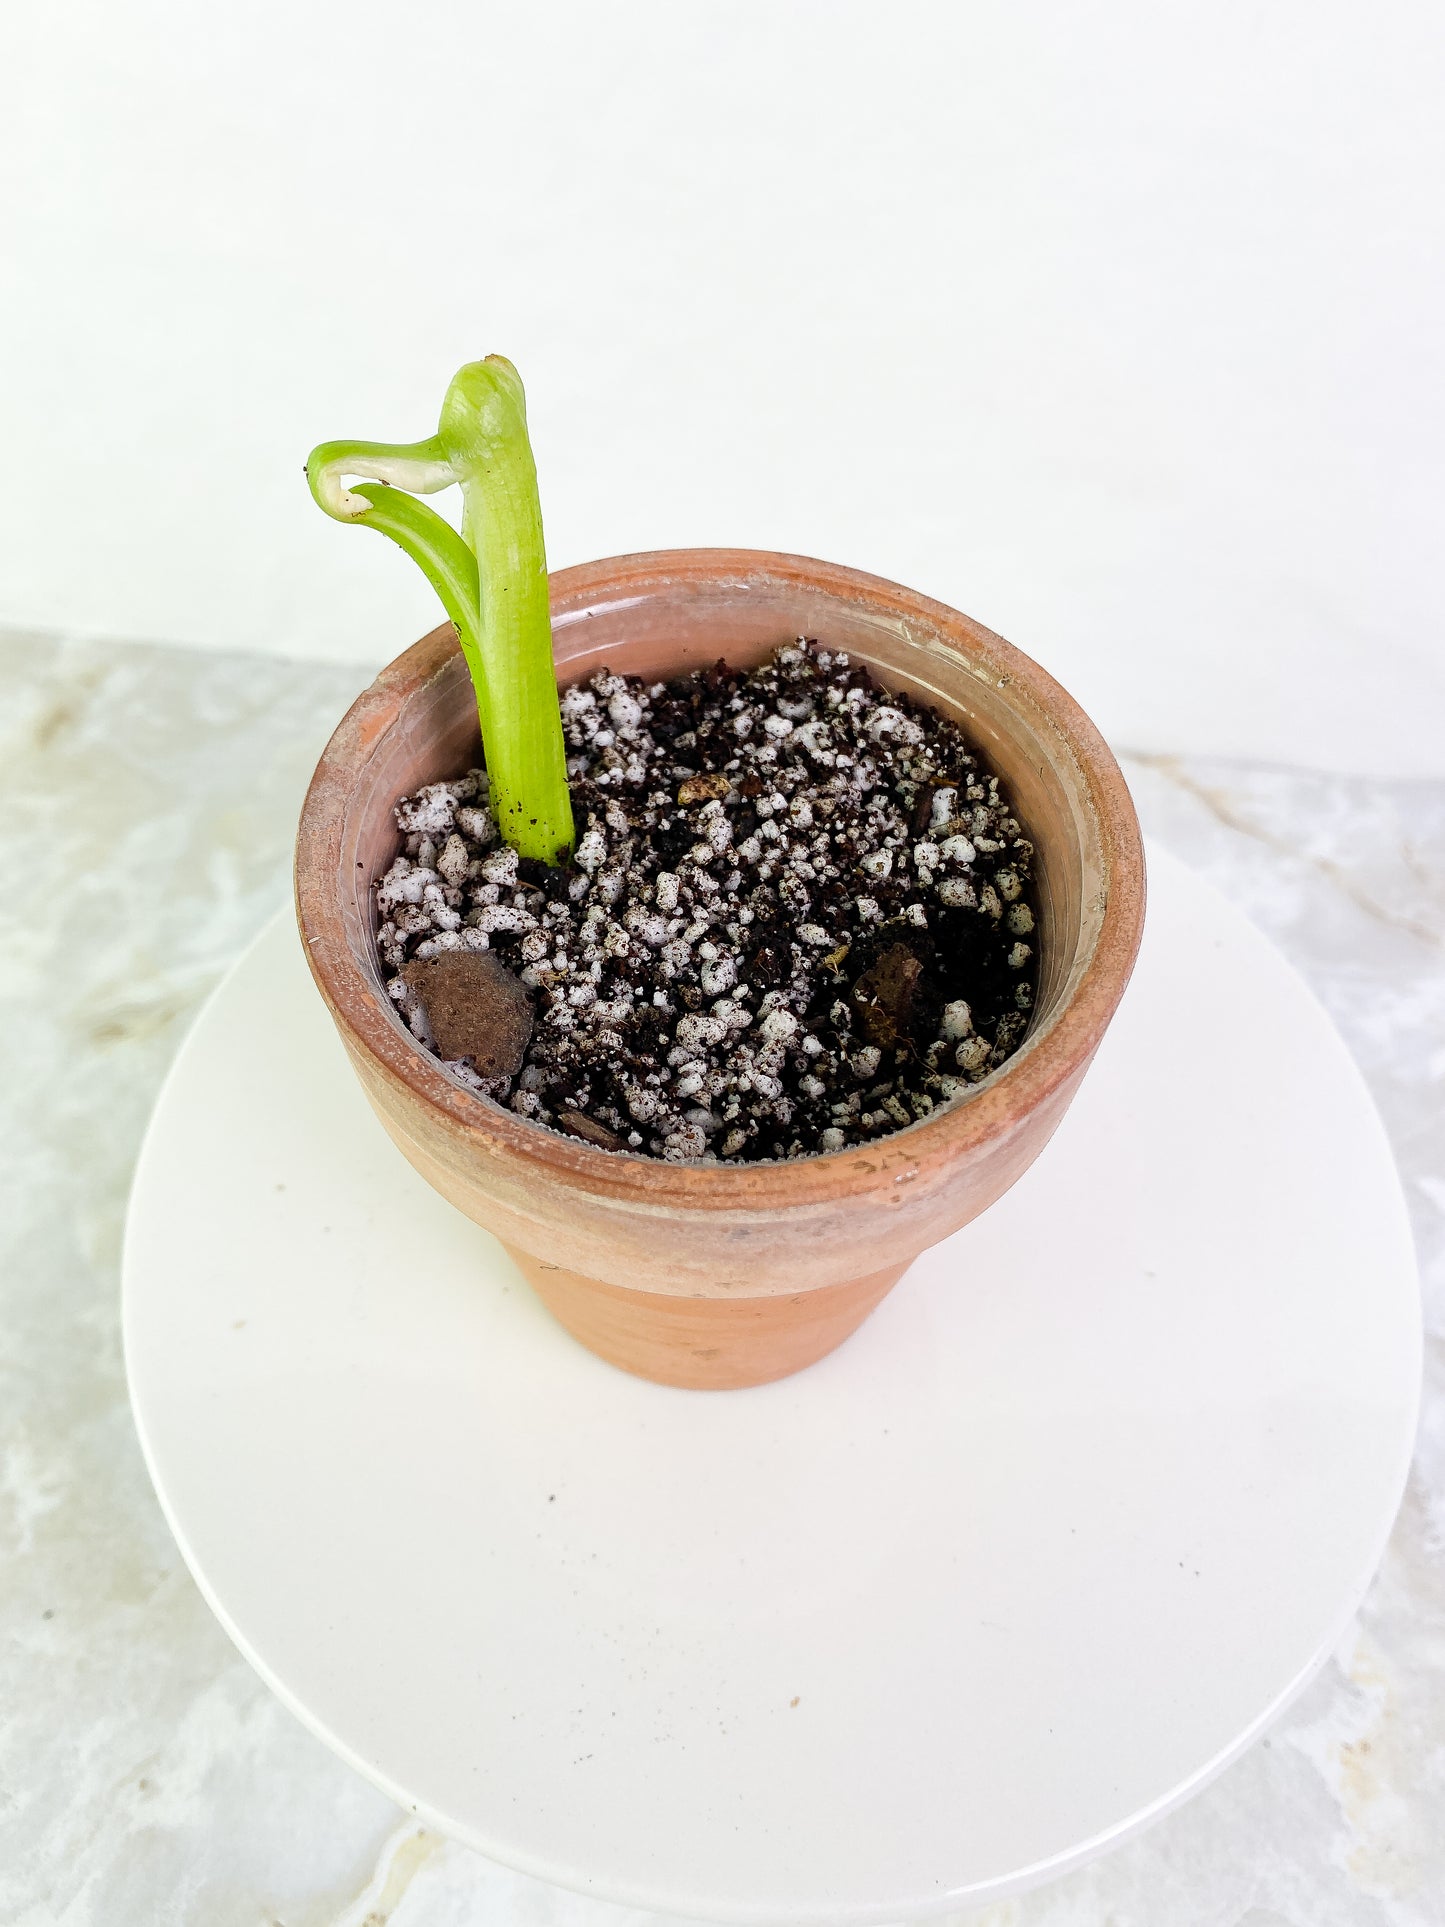 Philodendron Jose Buono sprout slightly rooted